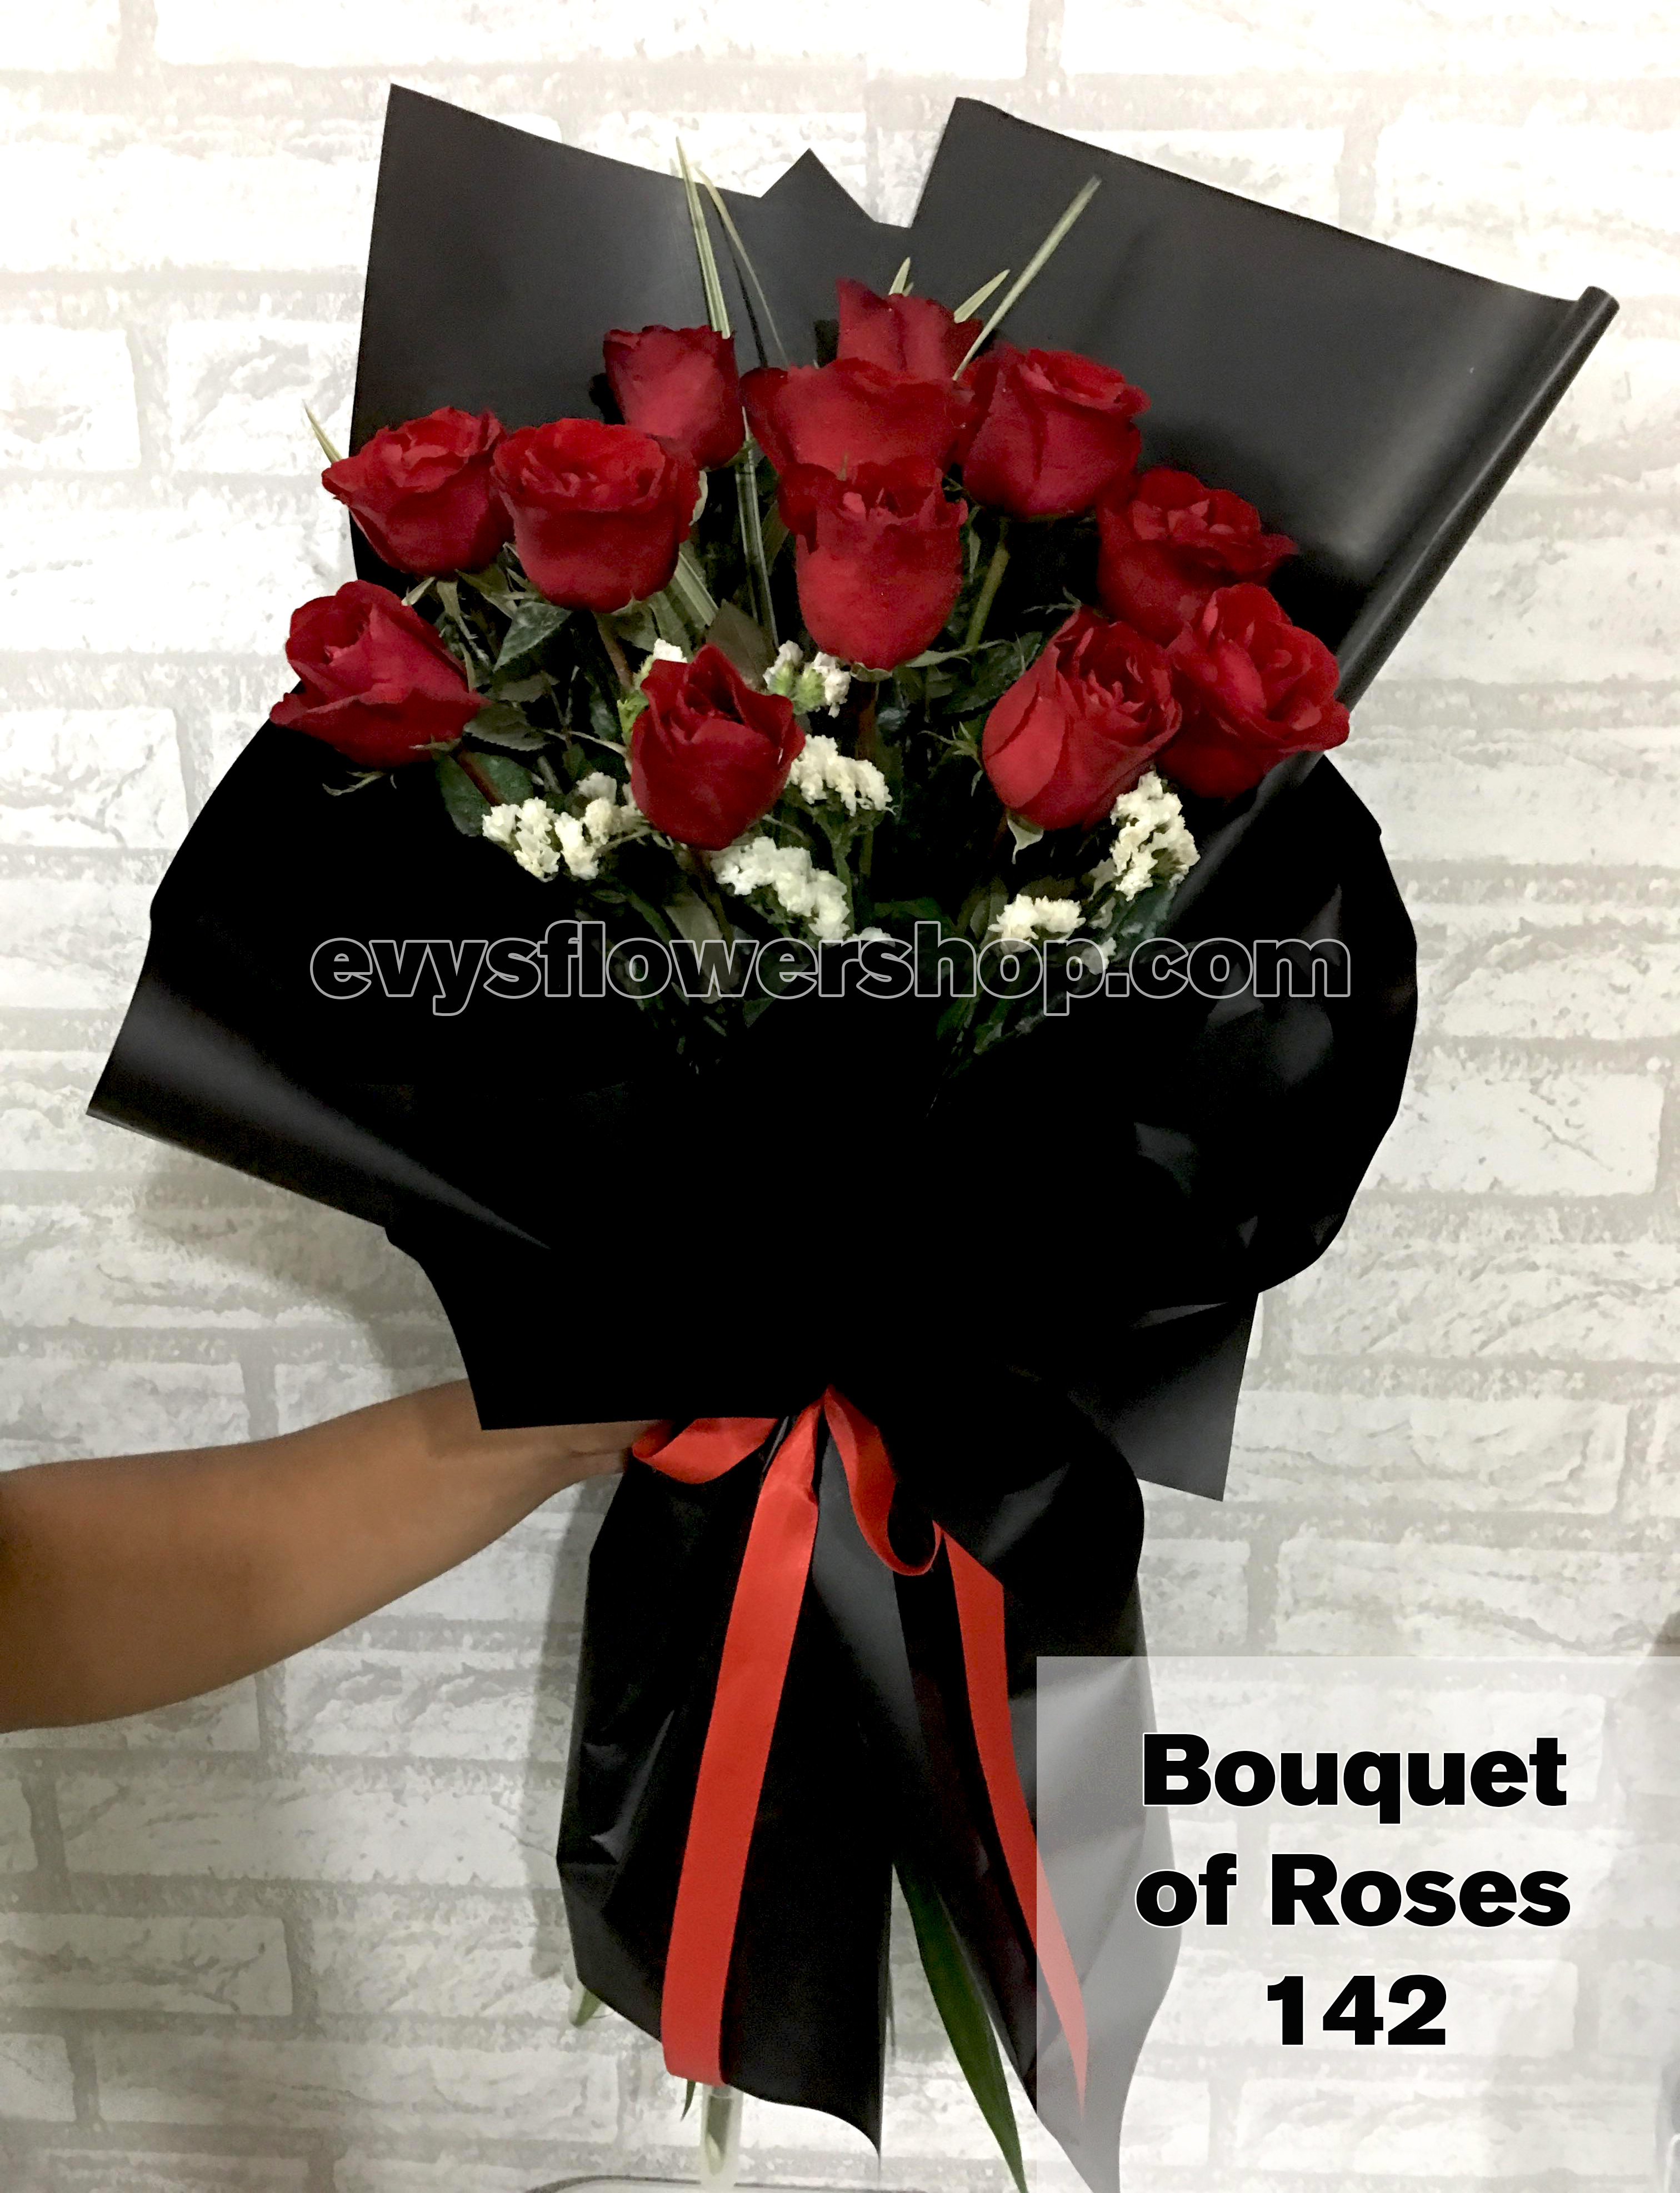 bouquet of roses 142 - EVYS FLOWER SHOP FREE DELIVERY